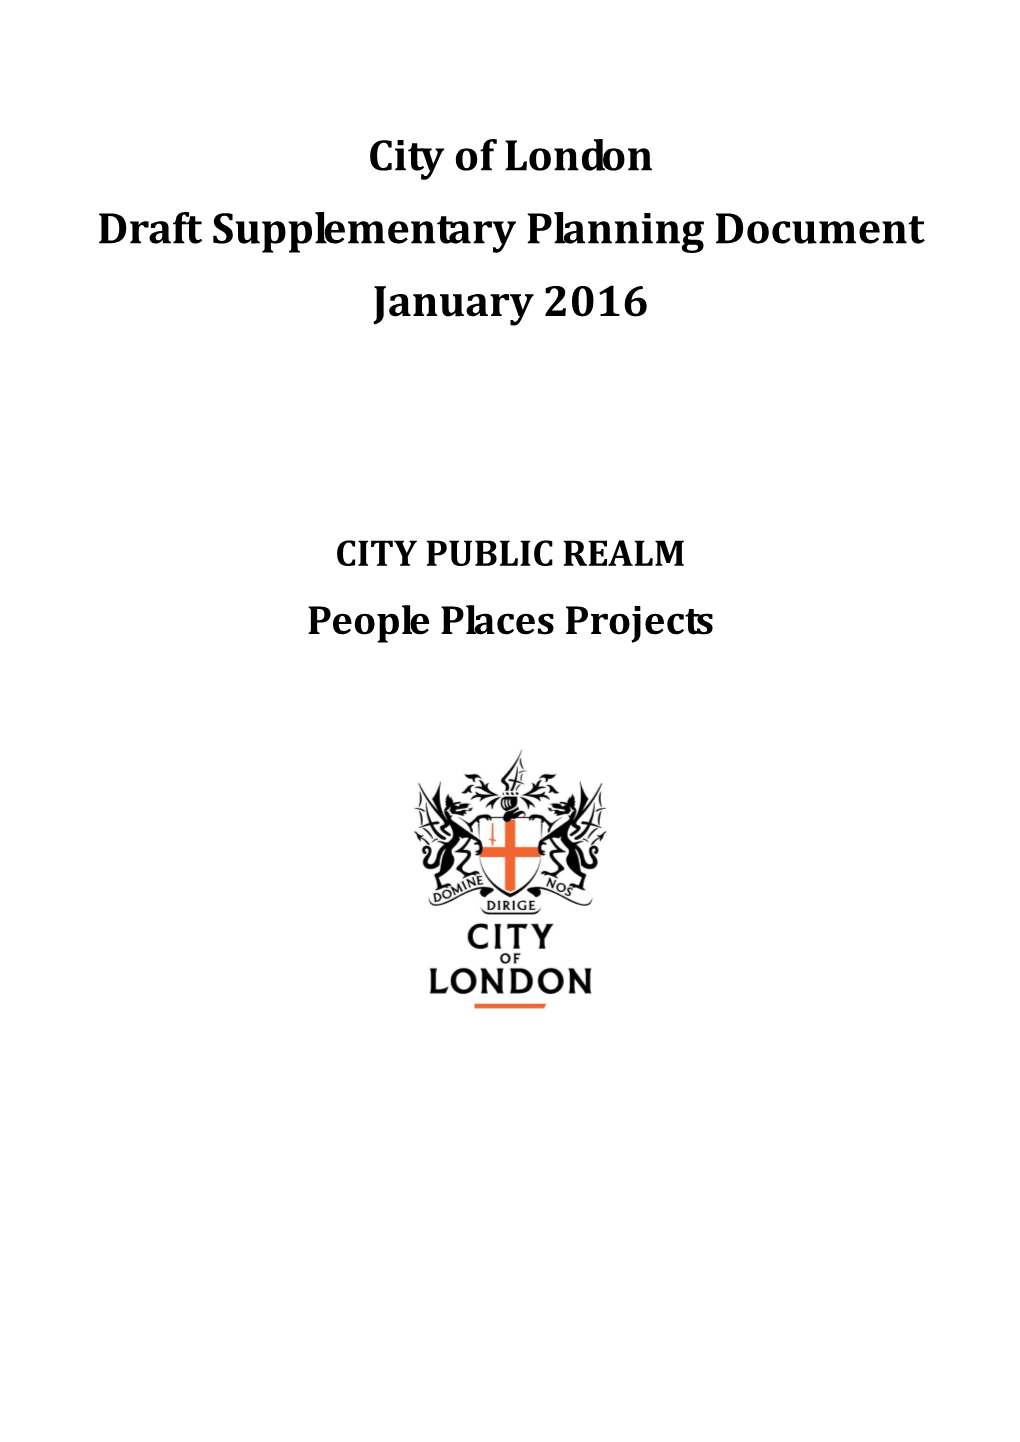 City of London Draft Supplementary Planning Document January 2016